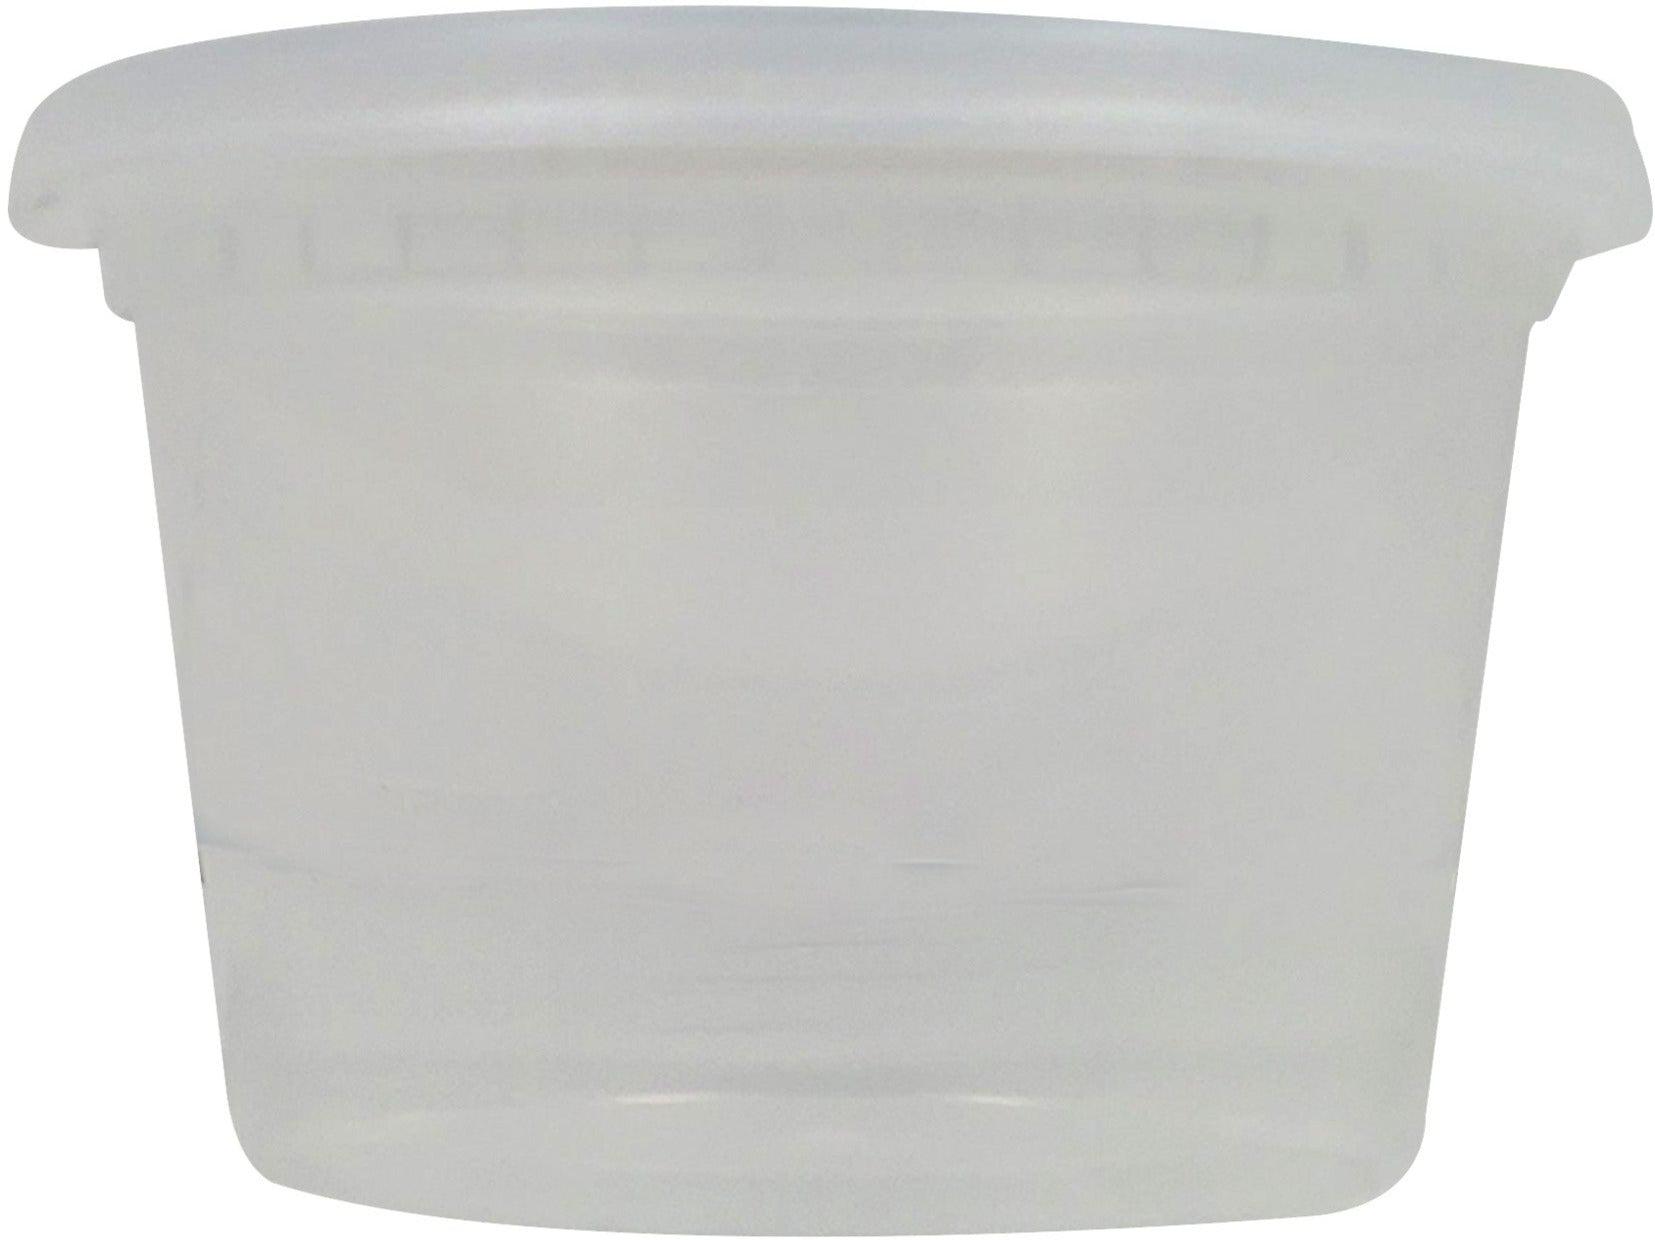 http://www.a1cashandcarry.com/cdn/shop/products/Value-Plus-16oz-Round-Deli-Container-wLids-Packaging-Value-Plus-Value-Plus-16oz-Round-Deli-Container-wLids-Packaging-Value-Plus-Value-Plus-16oz-Round-Deli-Container-wLids-Packaging-Va_bd1327d0-e63f-4495-af86-eff21bbd2148.jpg?v=1695089628